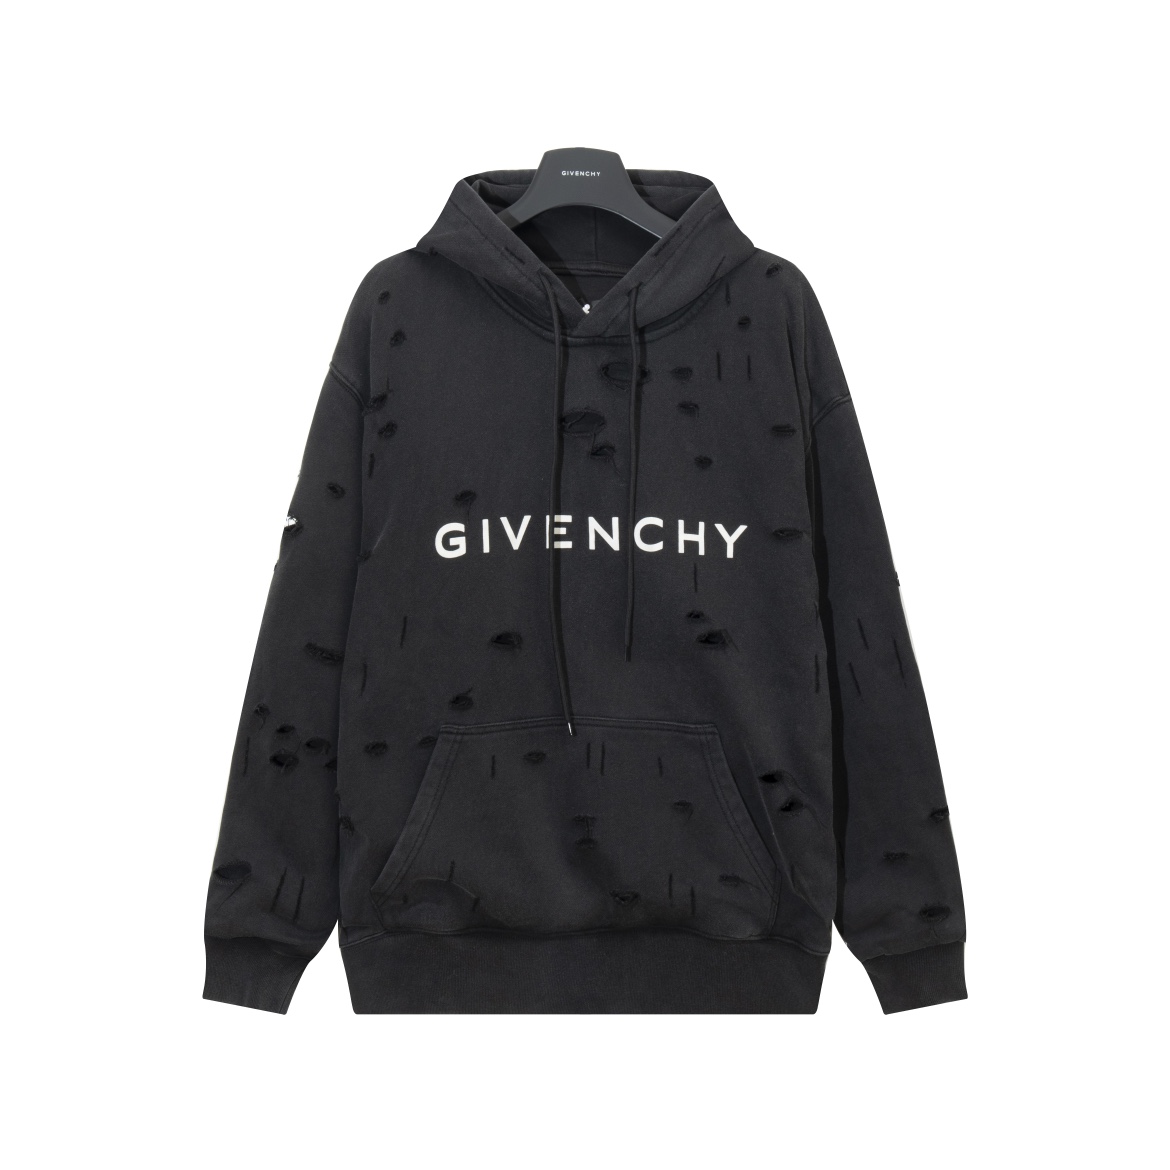 Givenchy Clothing Hoodies best website for replica
 Black Printing Cotton Hooded Top